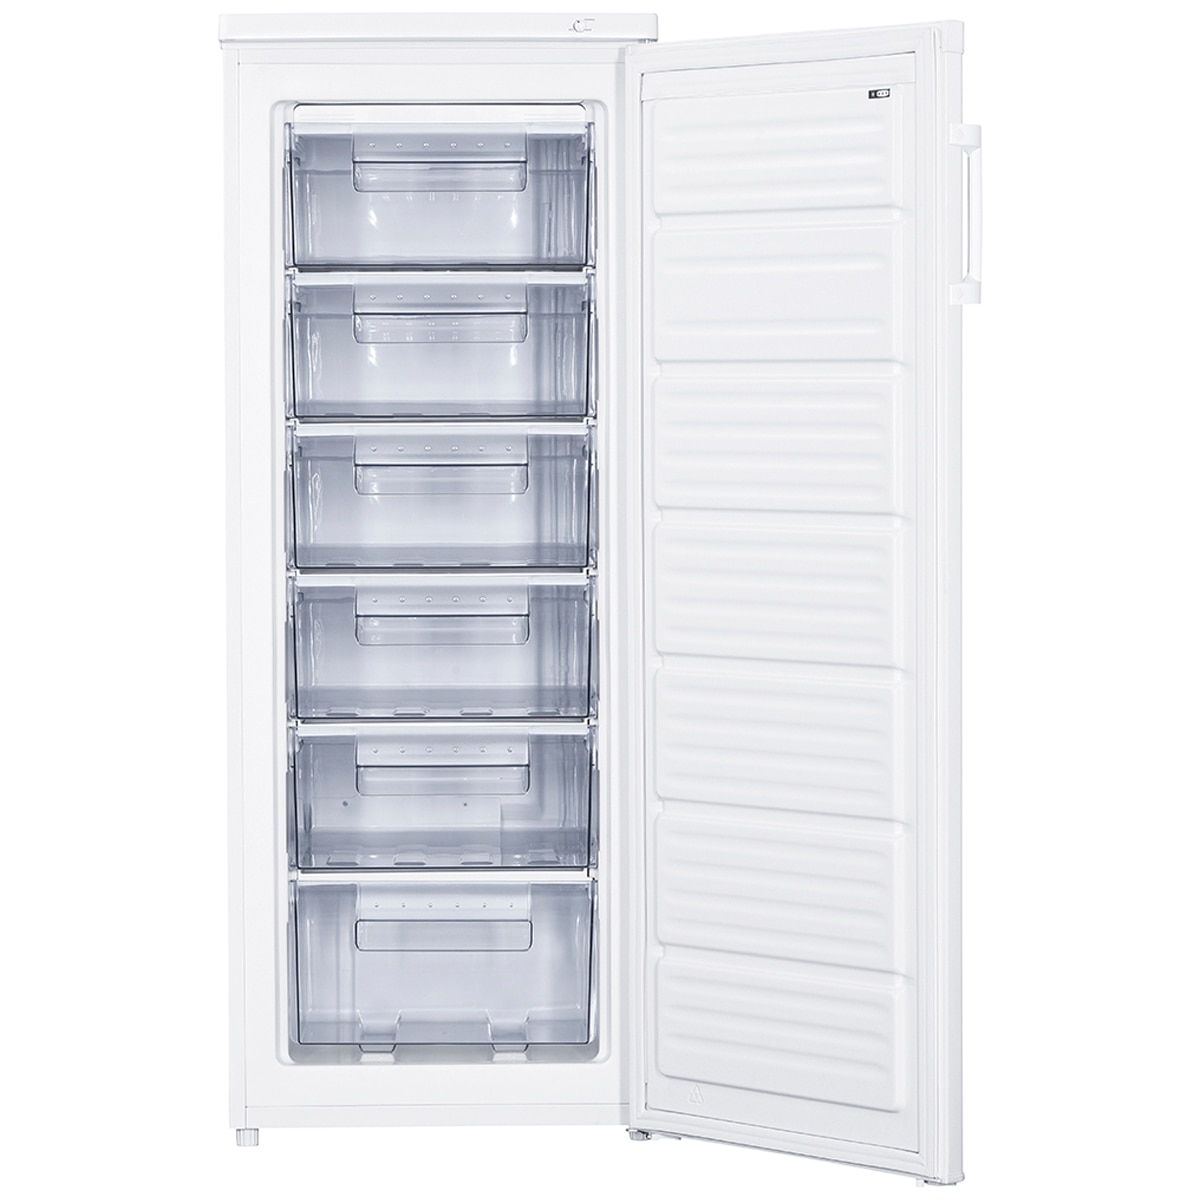 Upright Freezer With Pull Out Drawers Costco - Wibe Blog